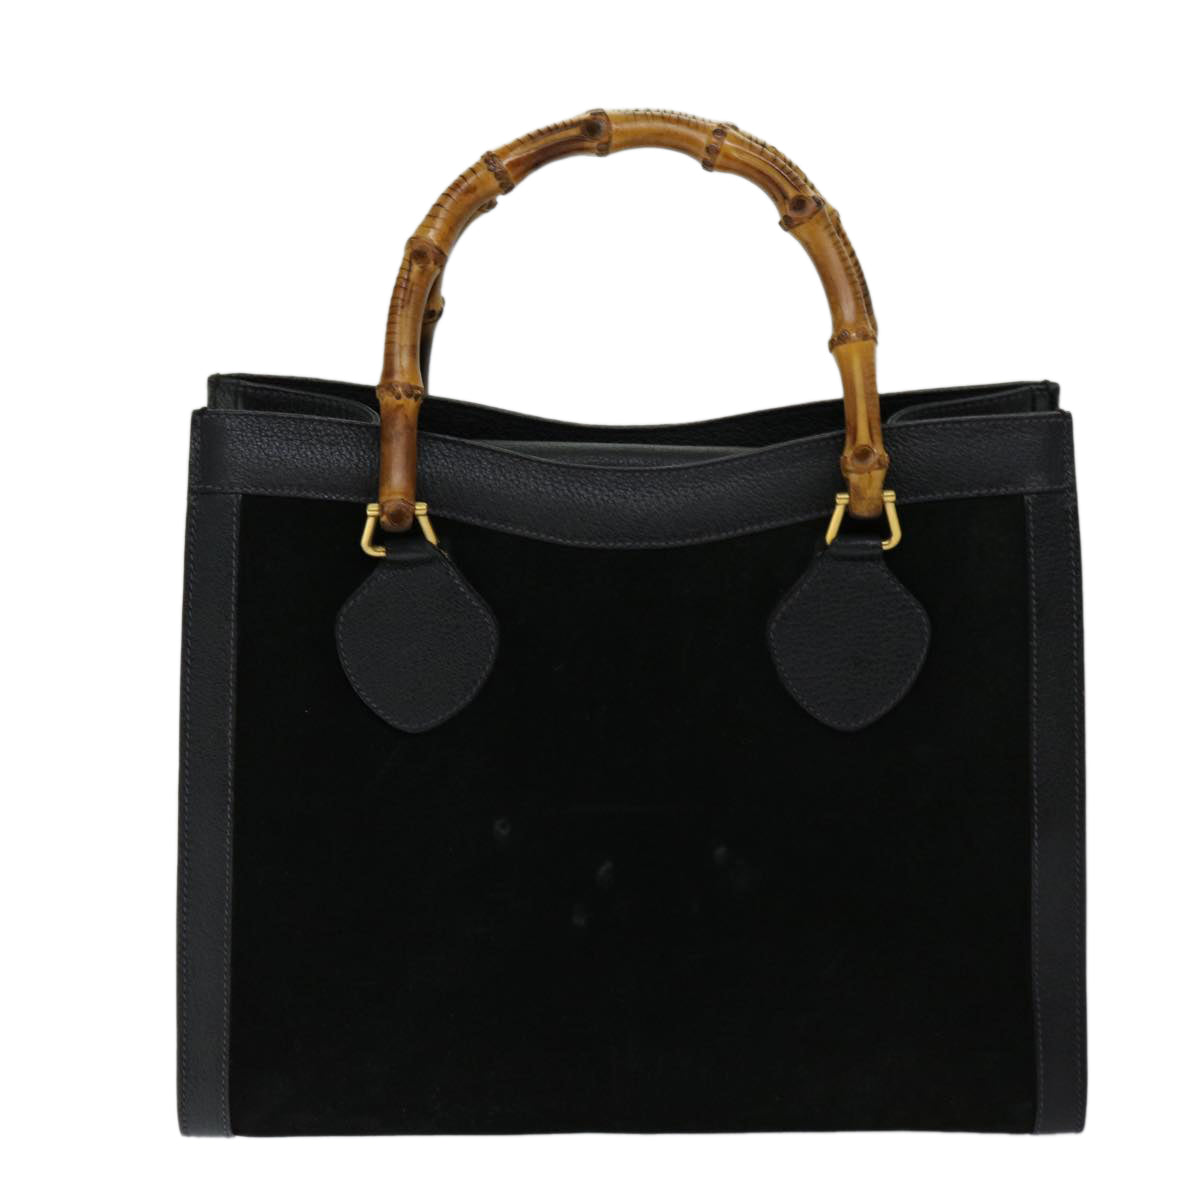 GUCCI Bamboo Tote Bag Suede Black 002 1095 0260 Auth 69422 - 0